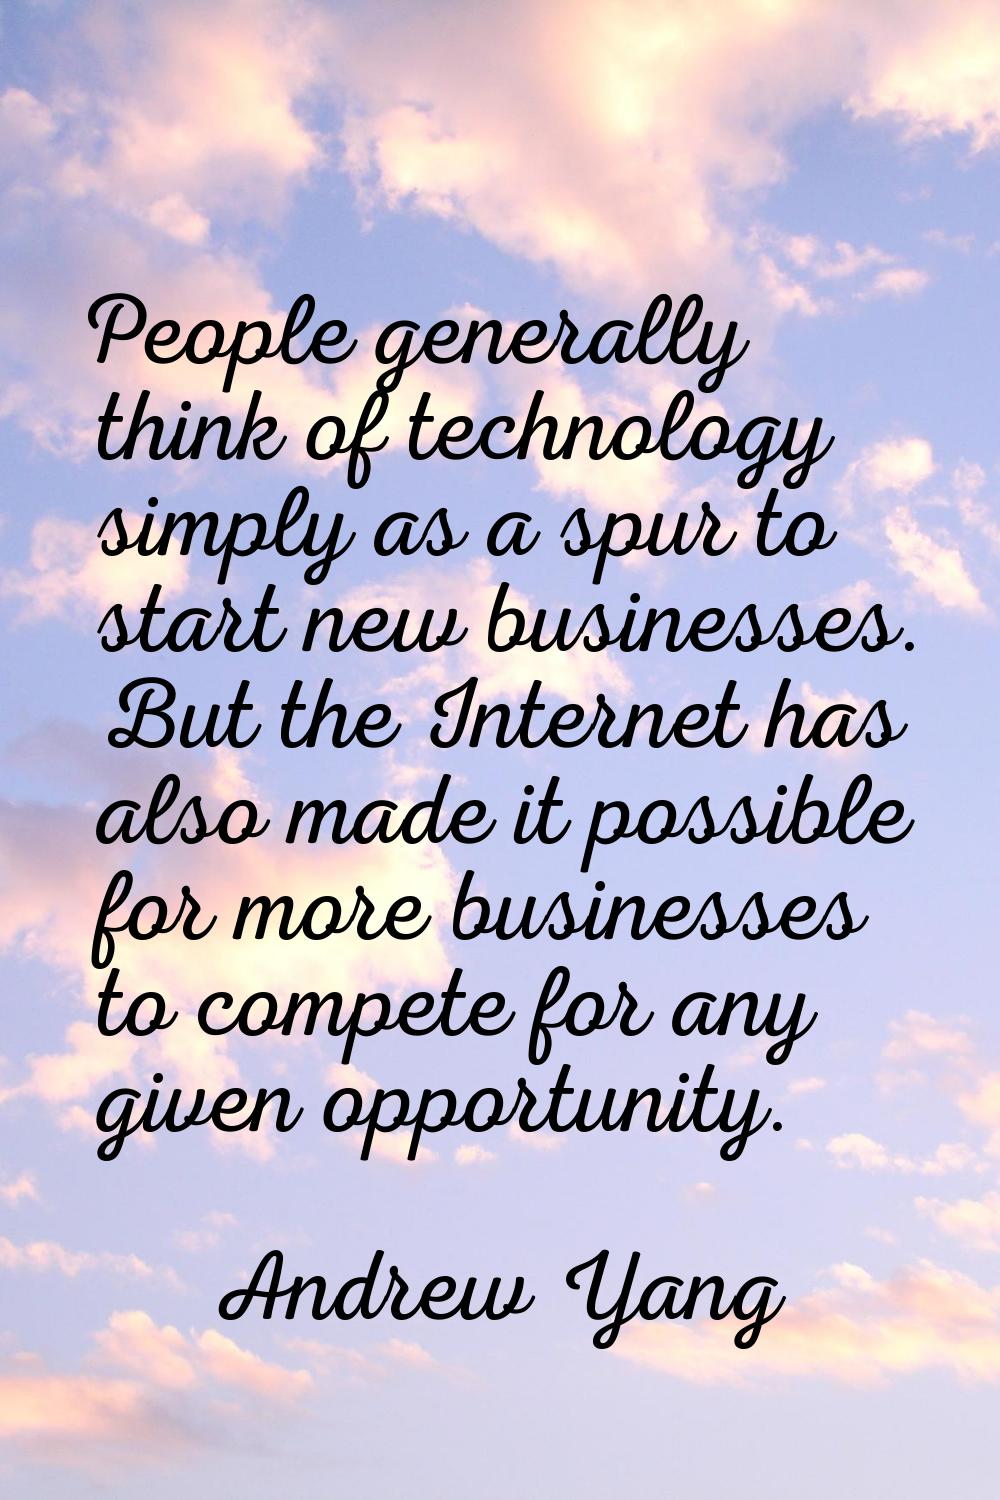 People generally think of technology simply as a spur to start new businesses. But the Internet has